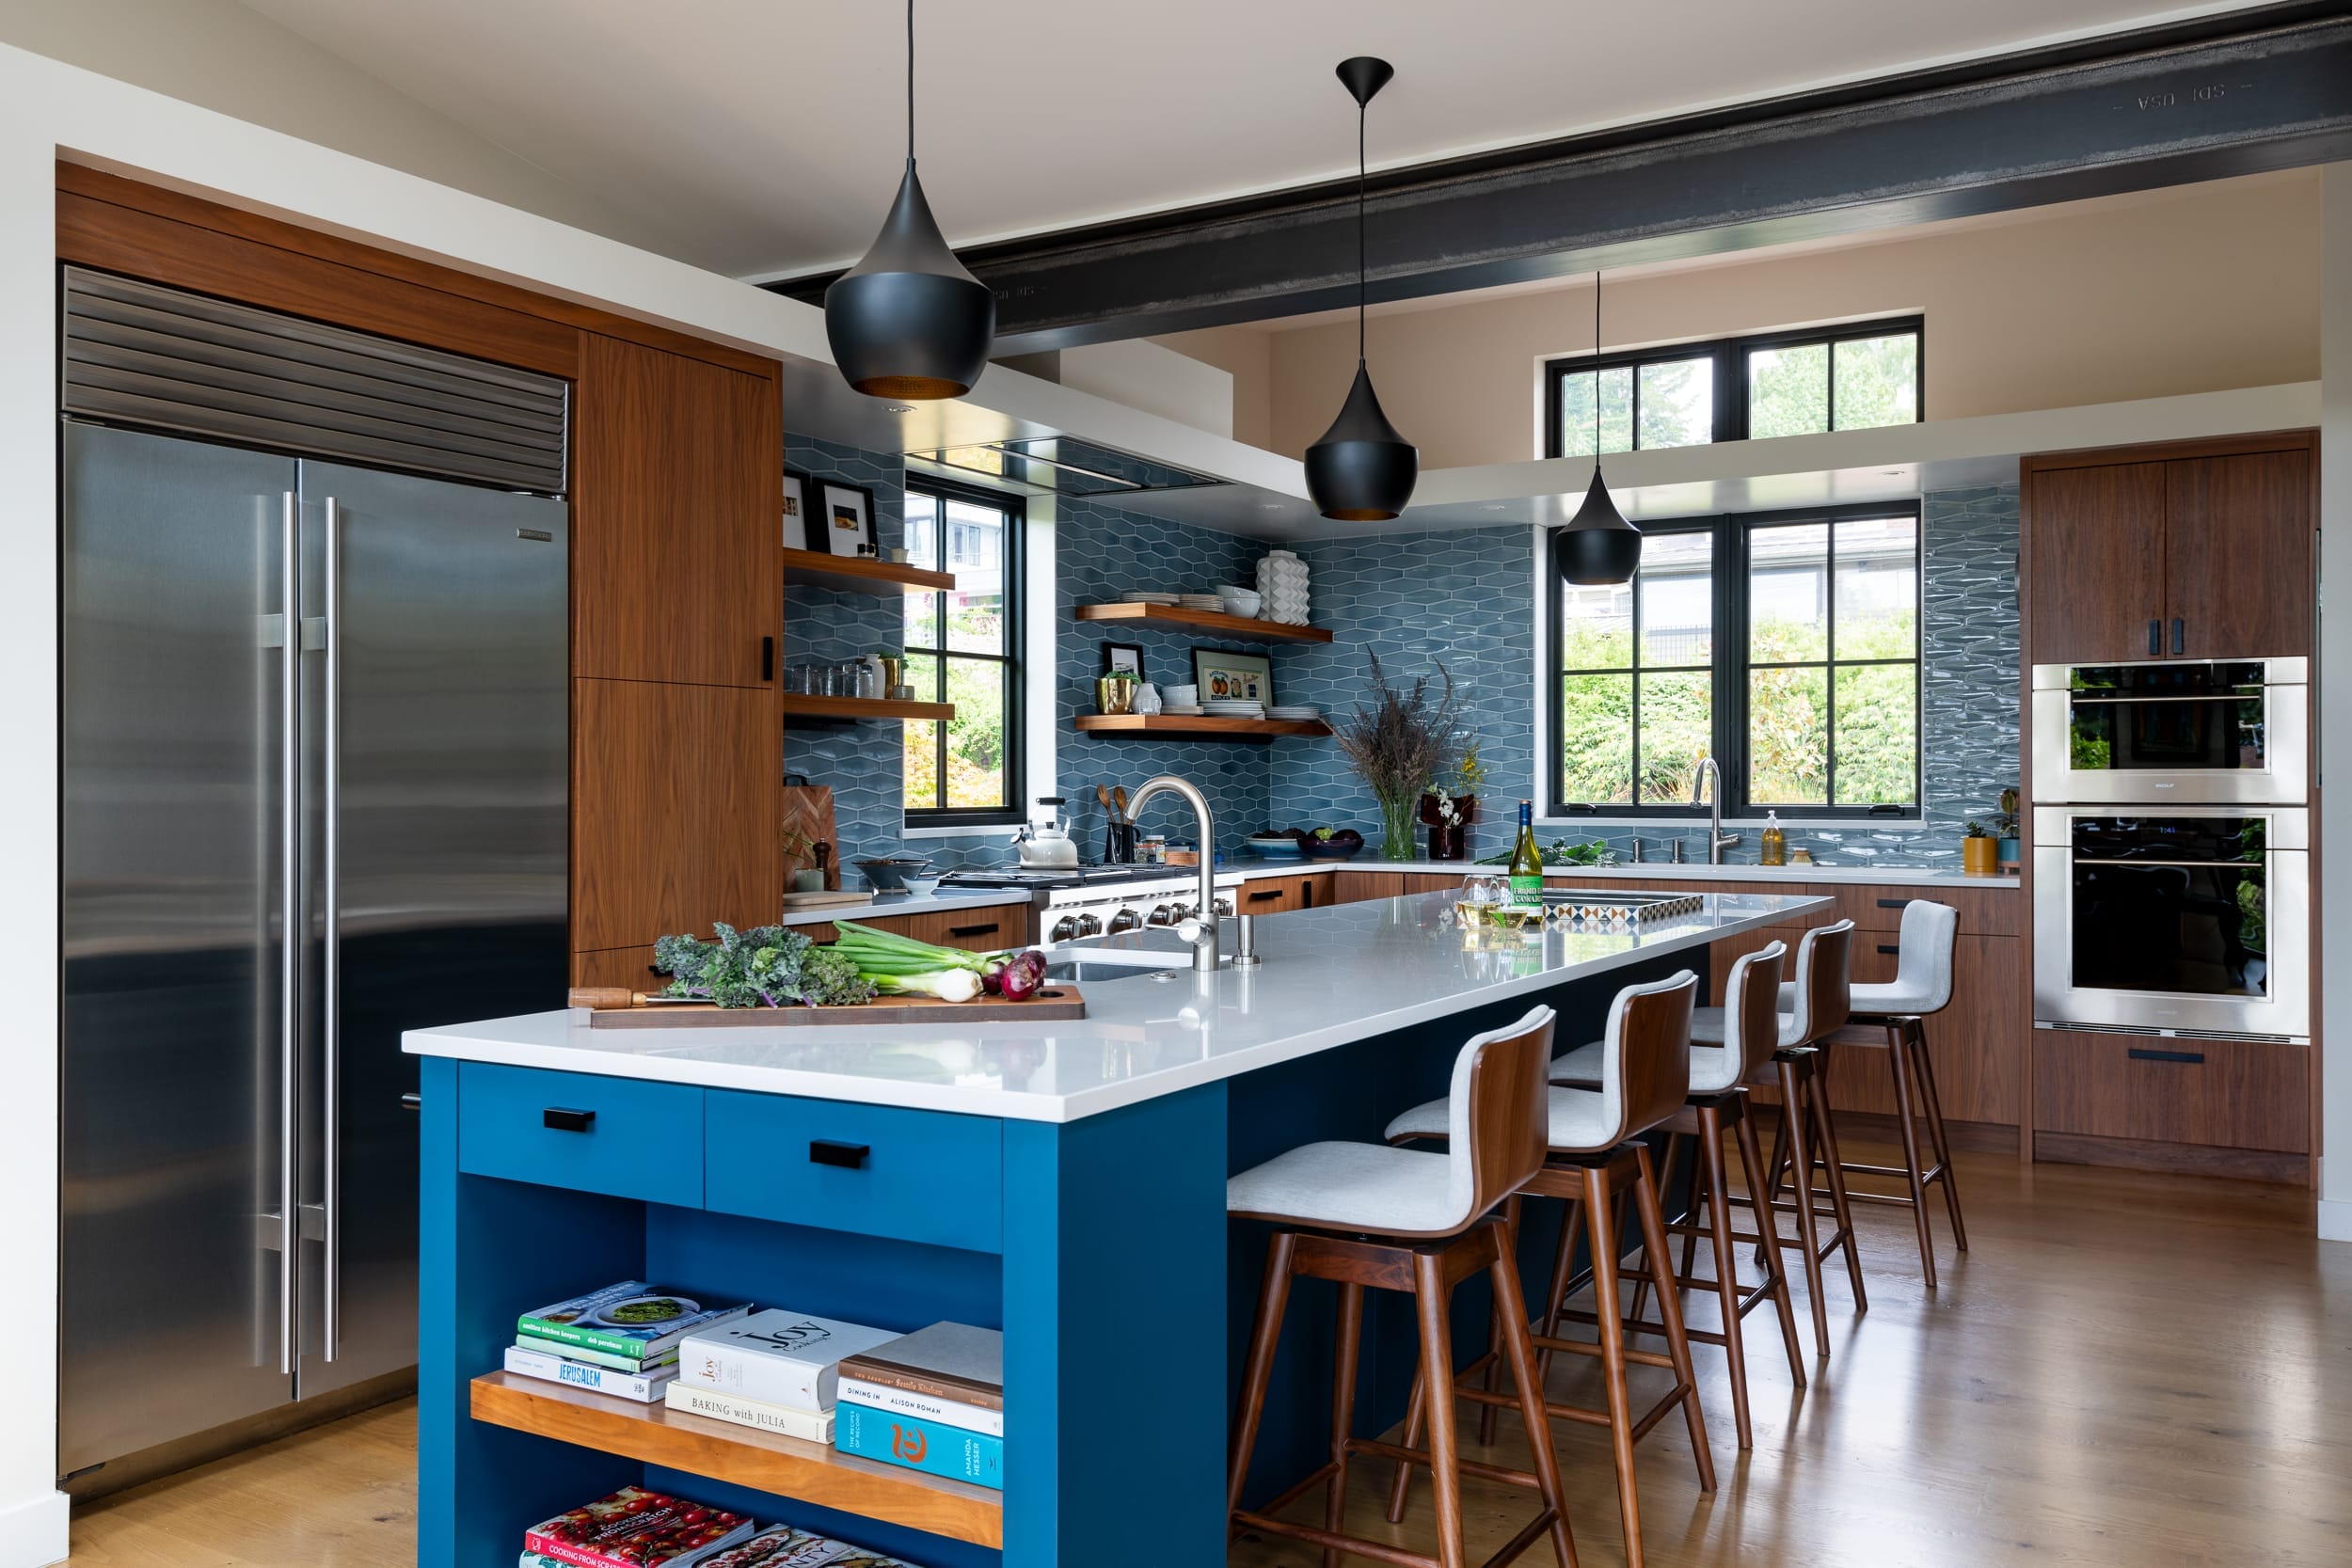 A kitchen with a blue island and stools.